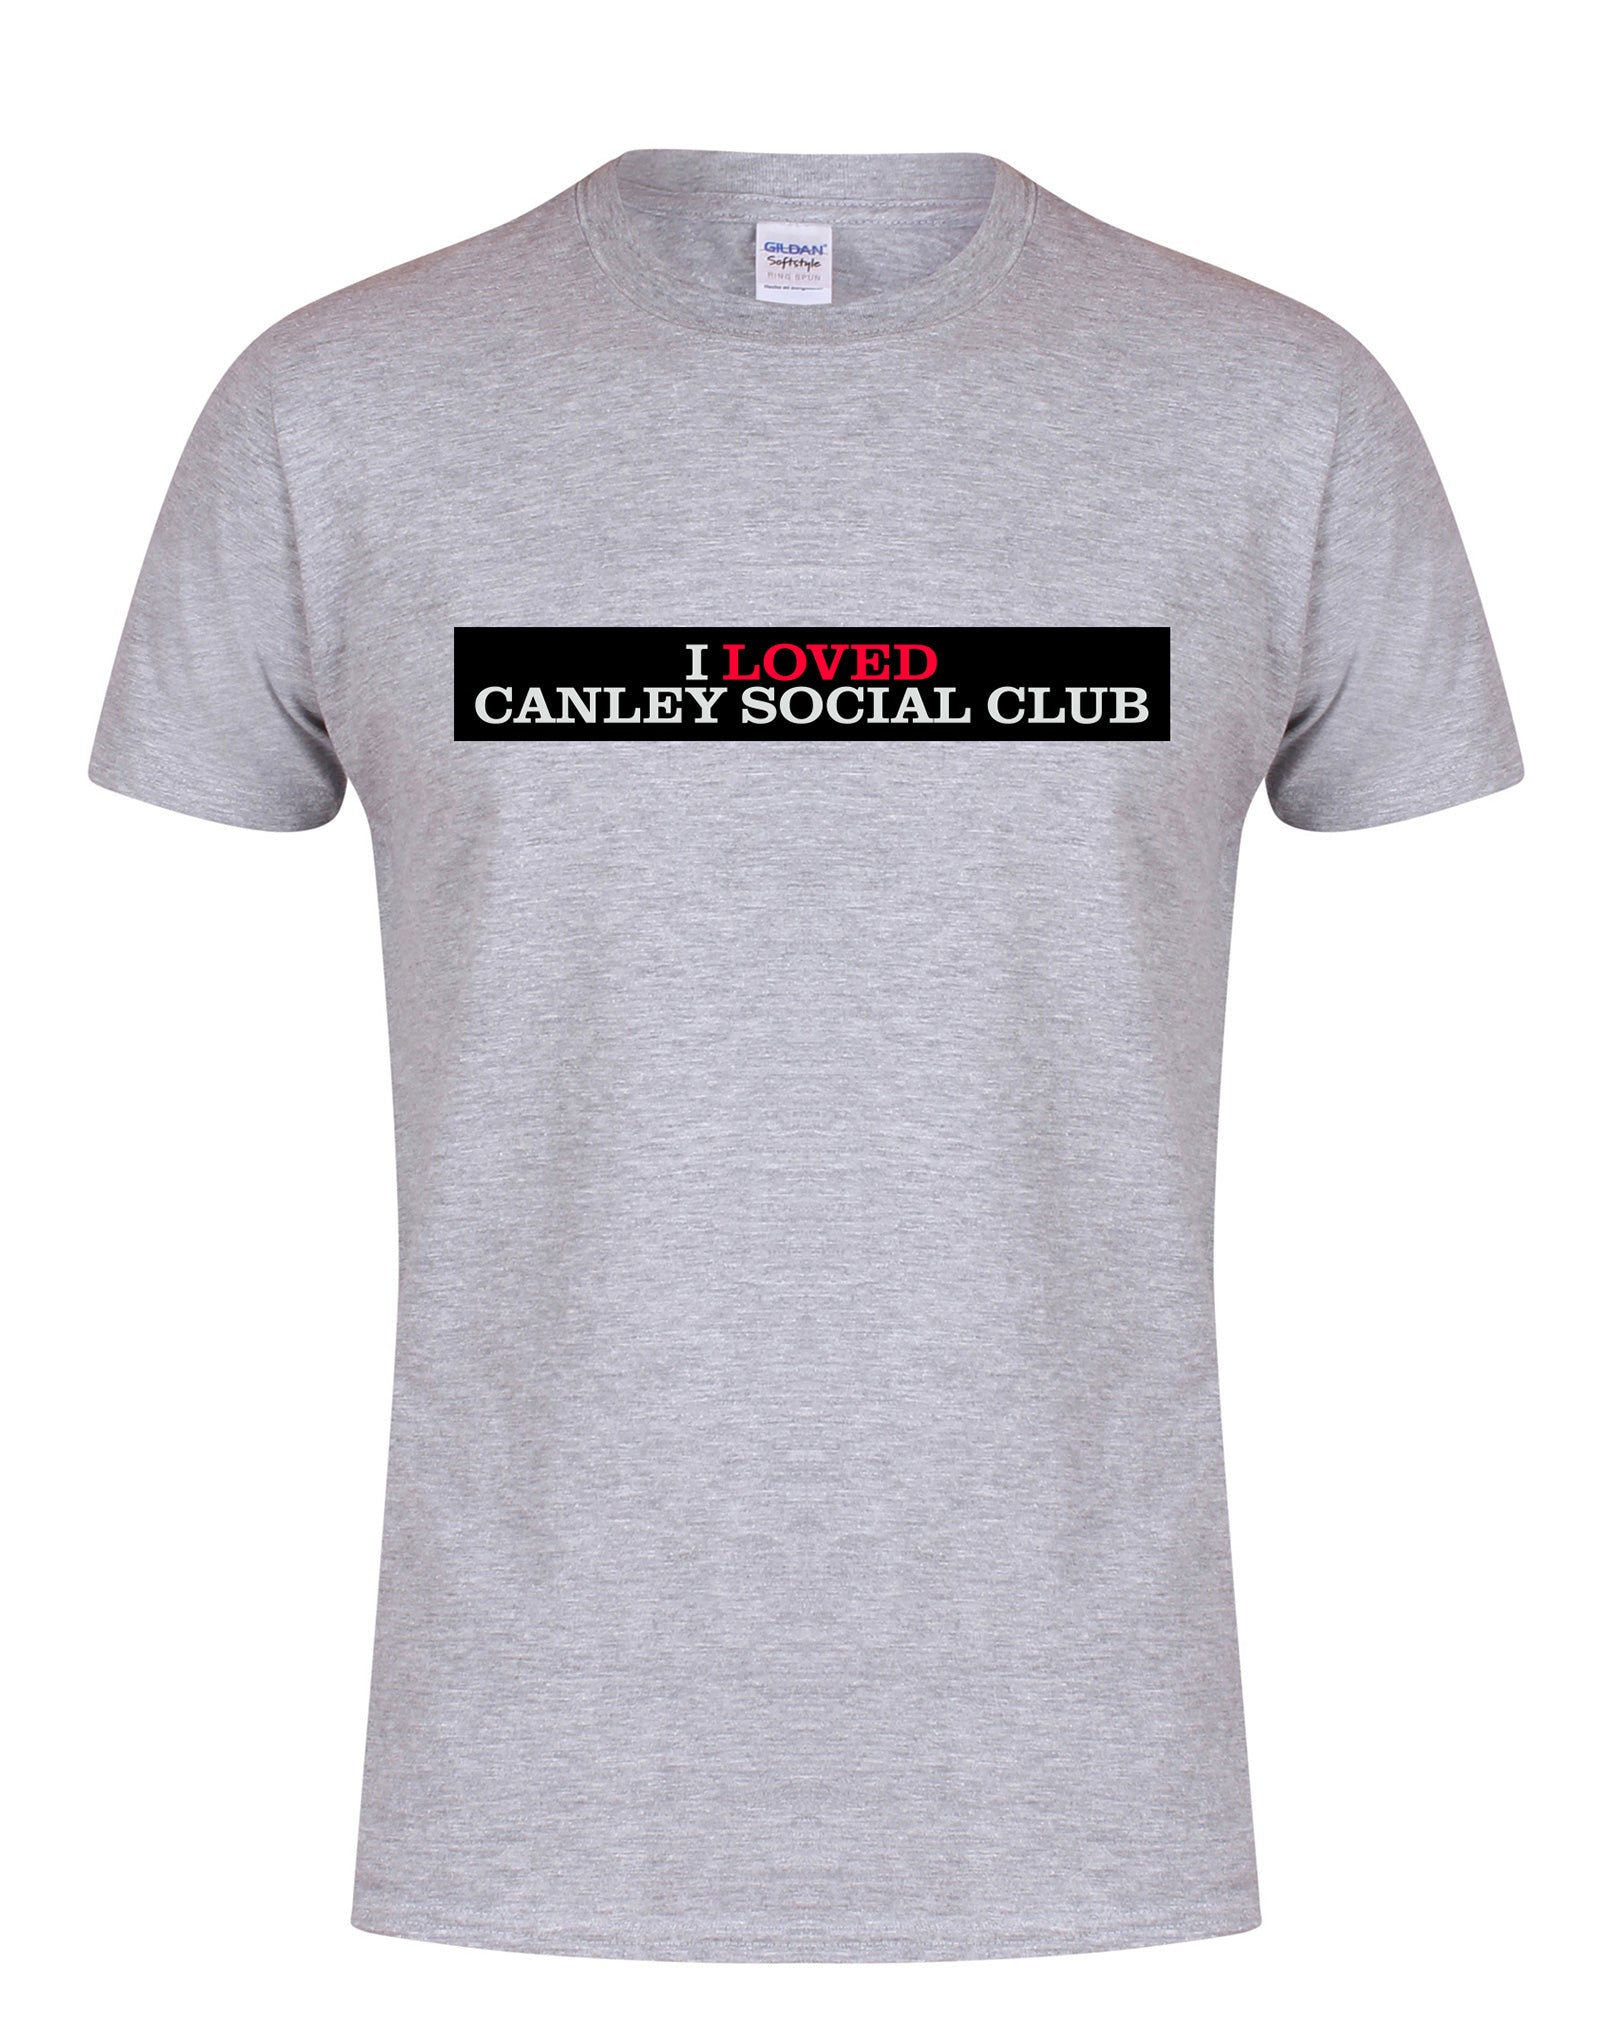 I Love Canley Social Club unisex fit T-shirt - various colours - Dirty Stop Outs